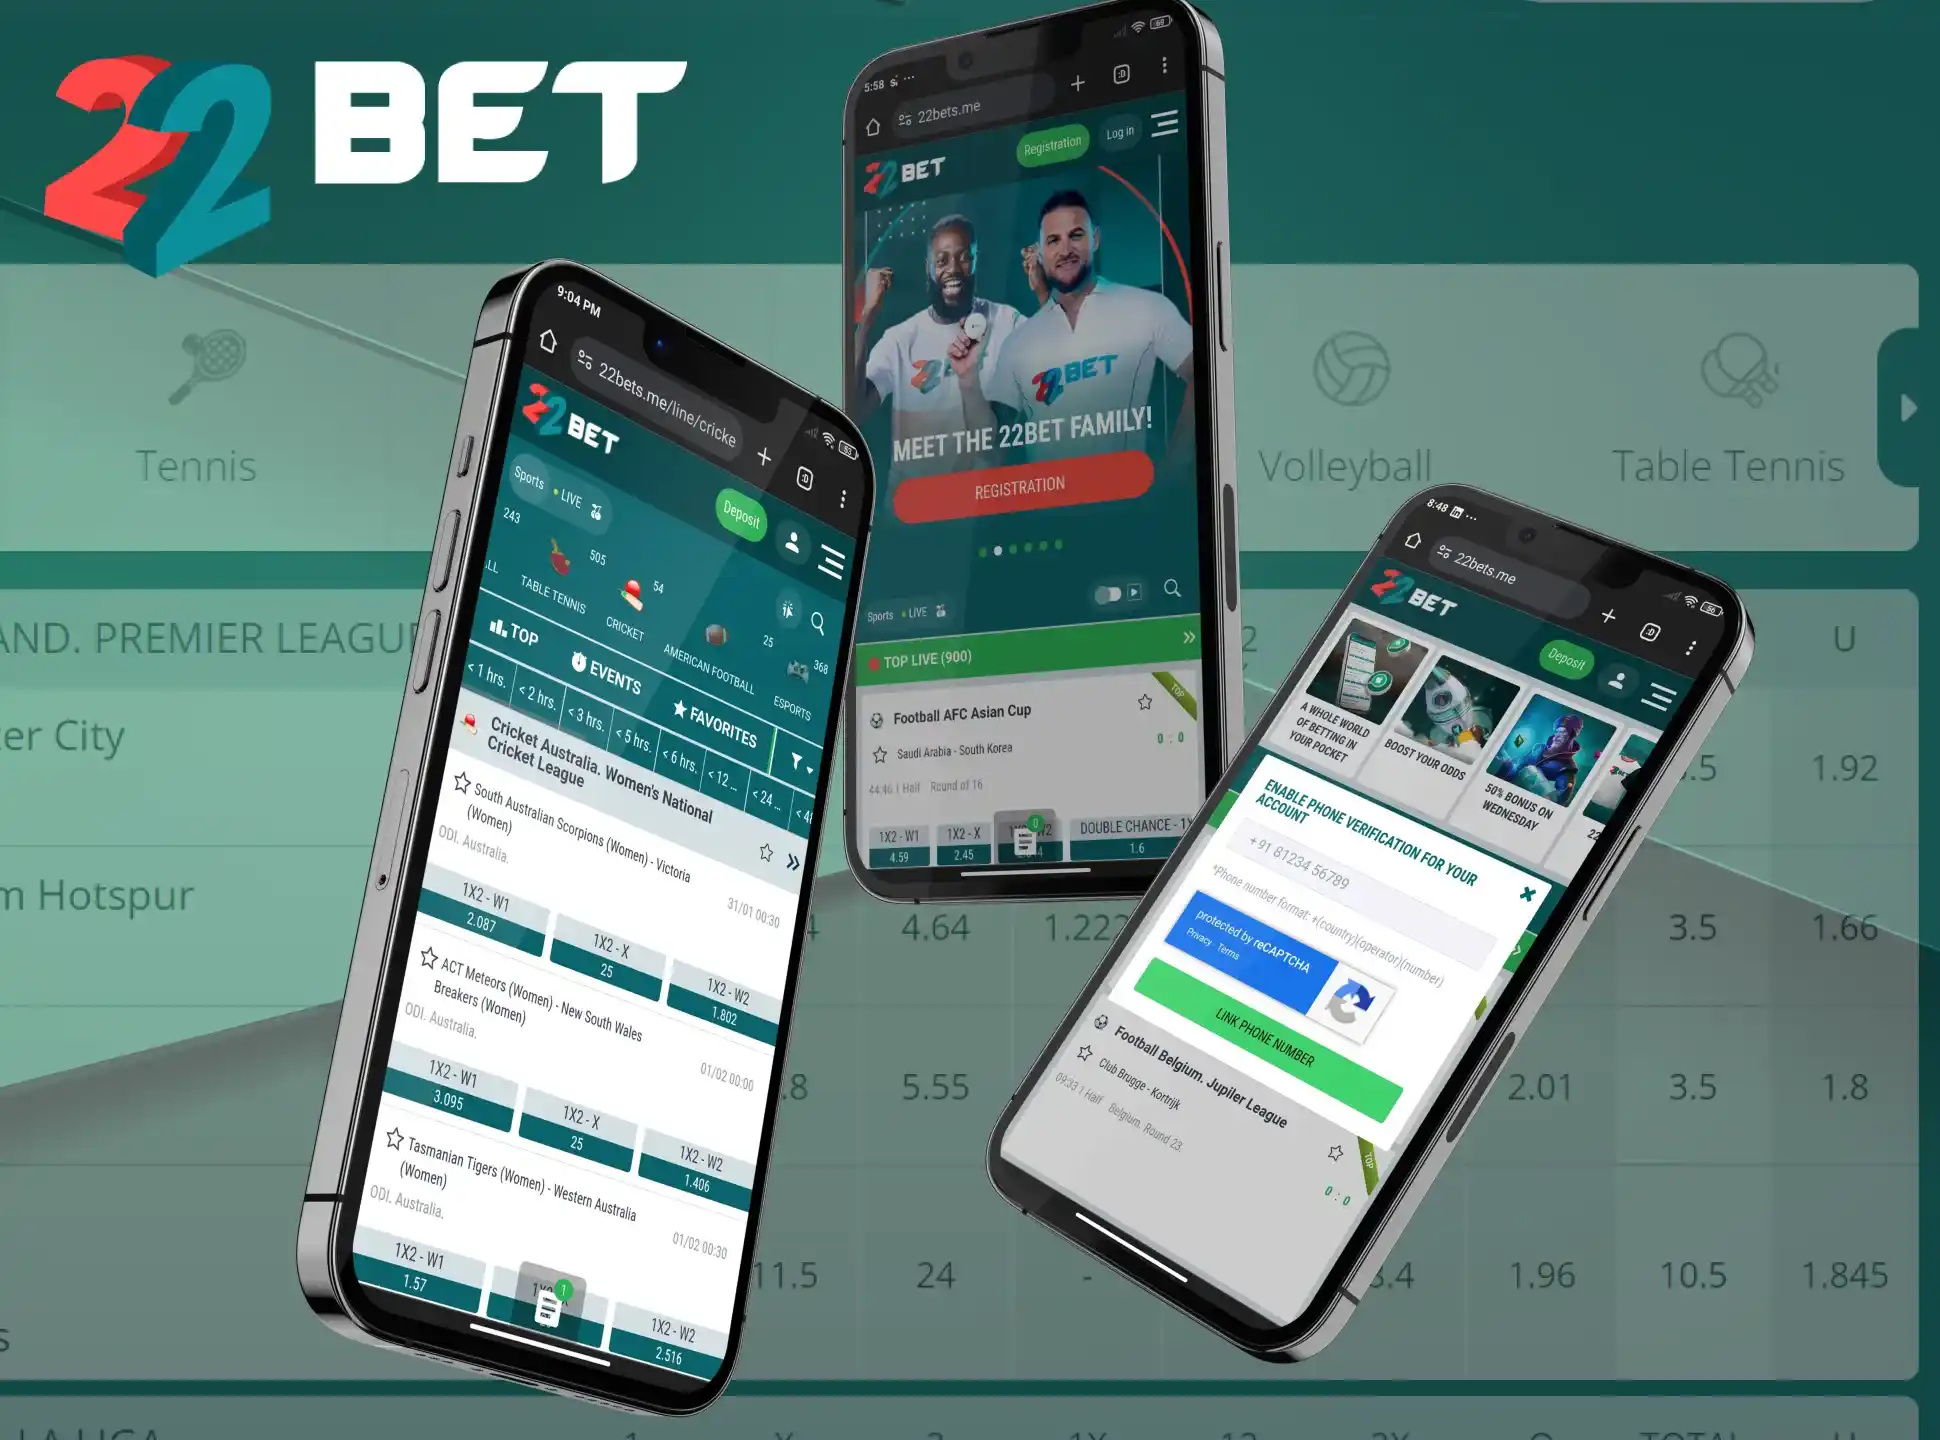 Biometric authentication, exclusive promotions and bonuses in the 22Bet Bet app.